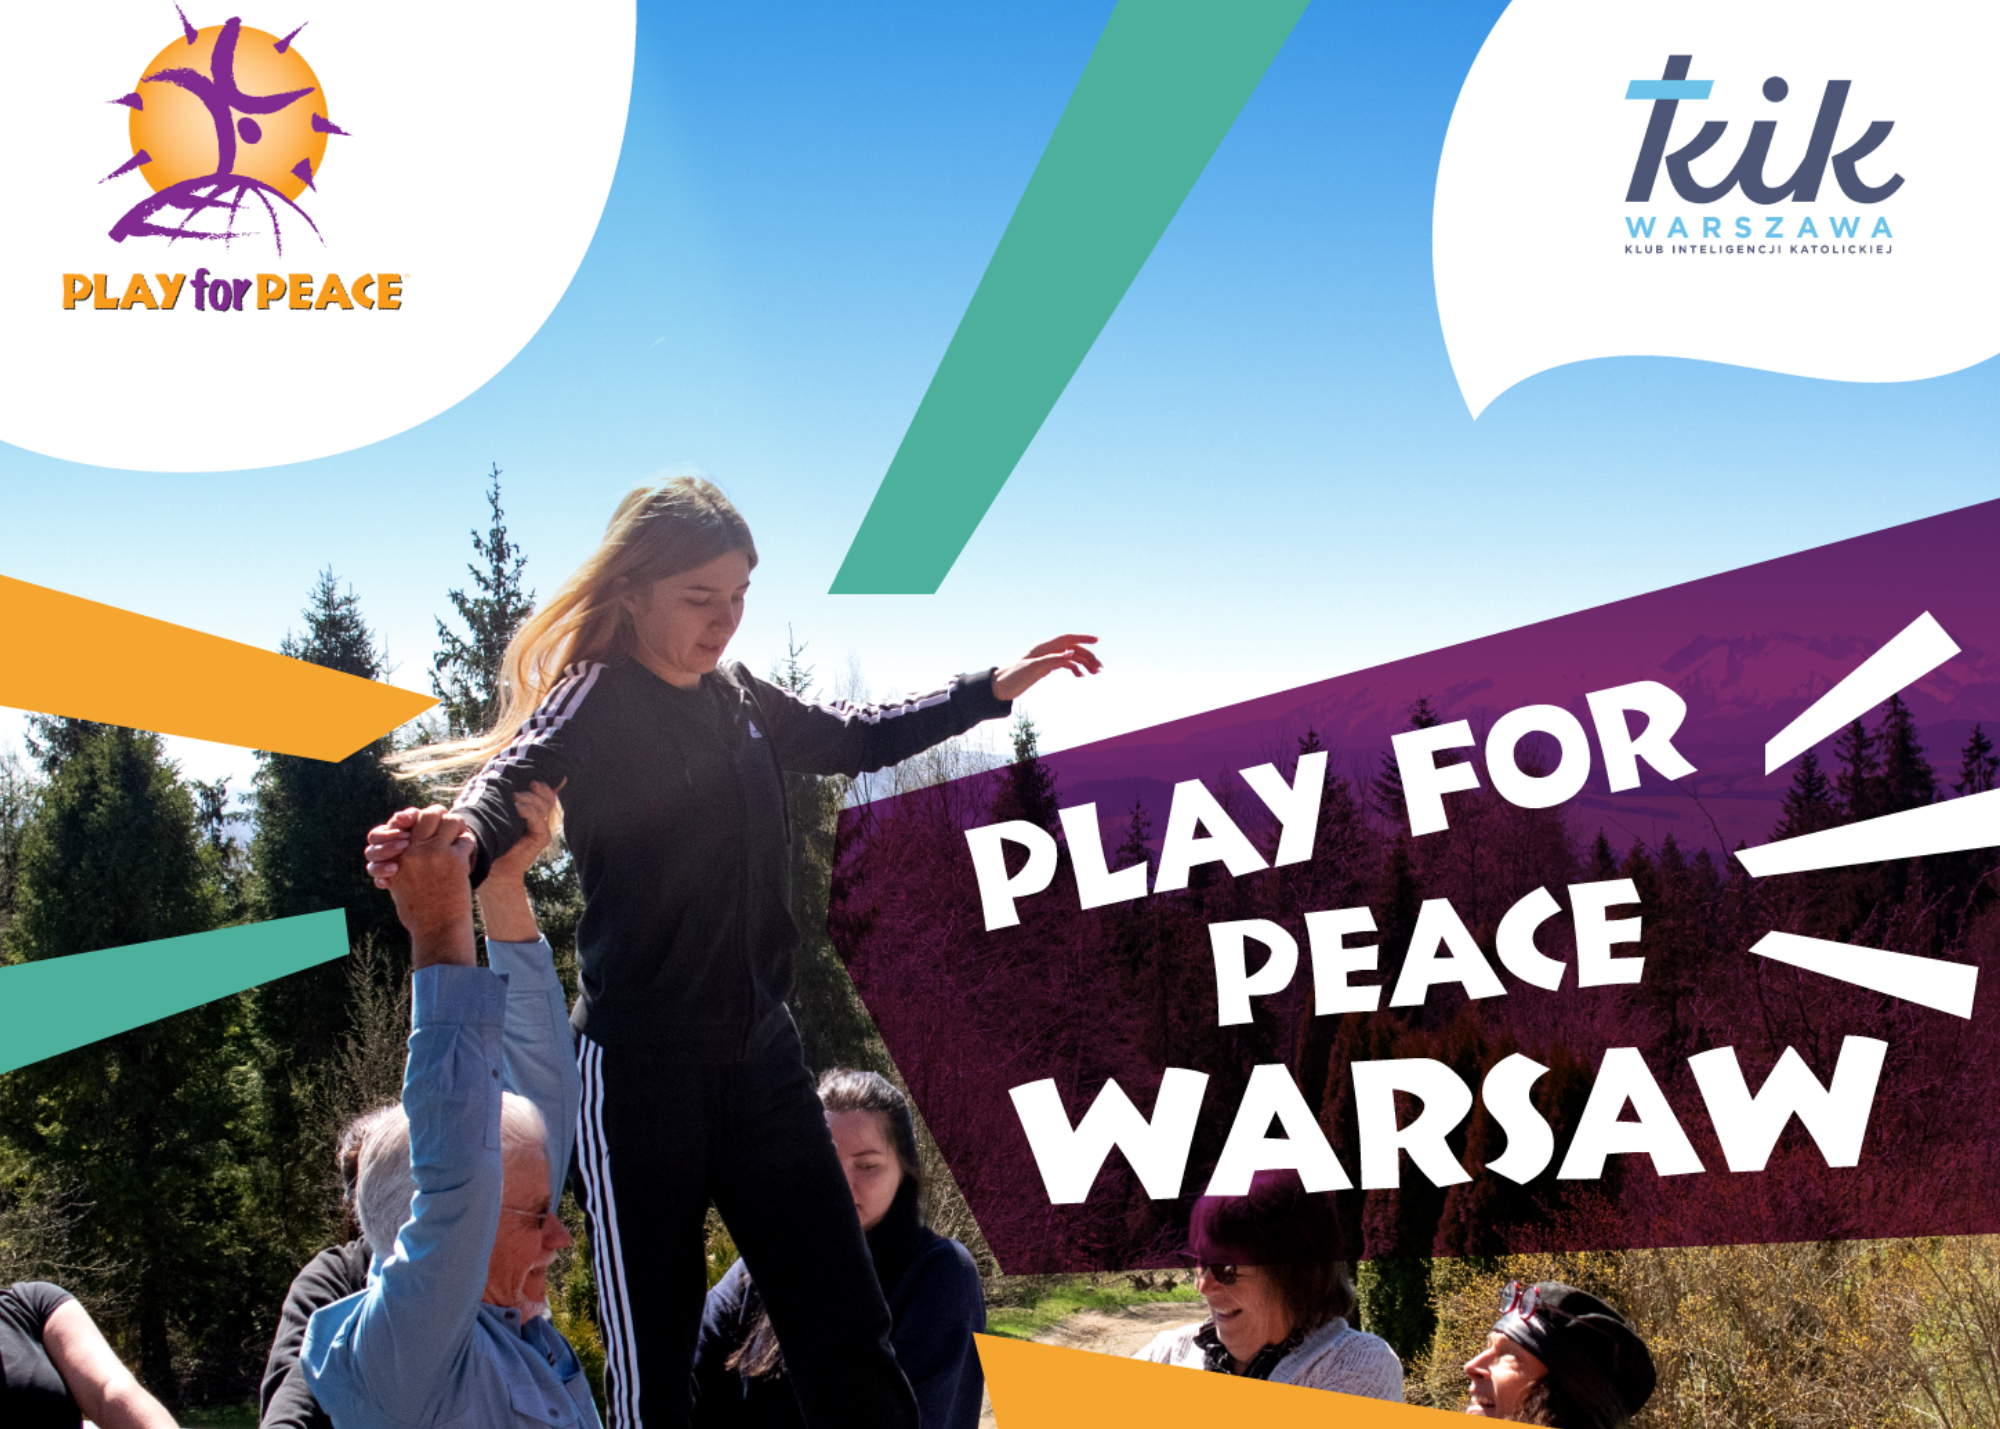 Play for Peace Club supporting Ukrainian and Polish Teens to open in Warsaw soon!